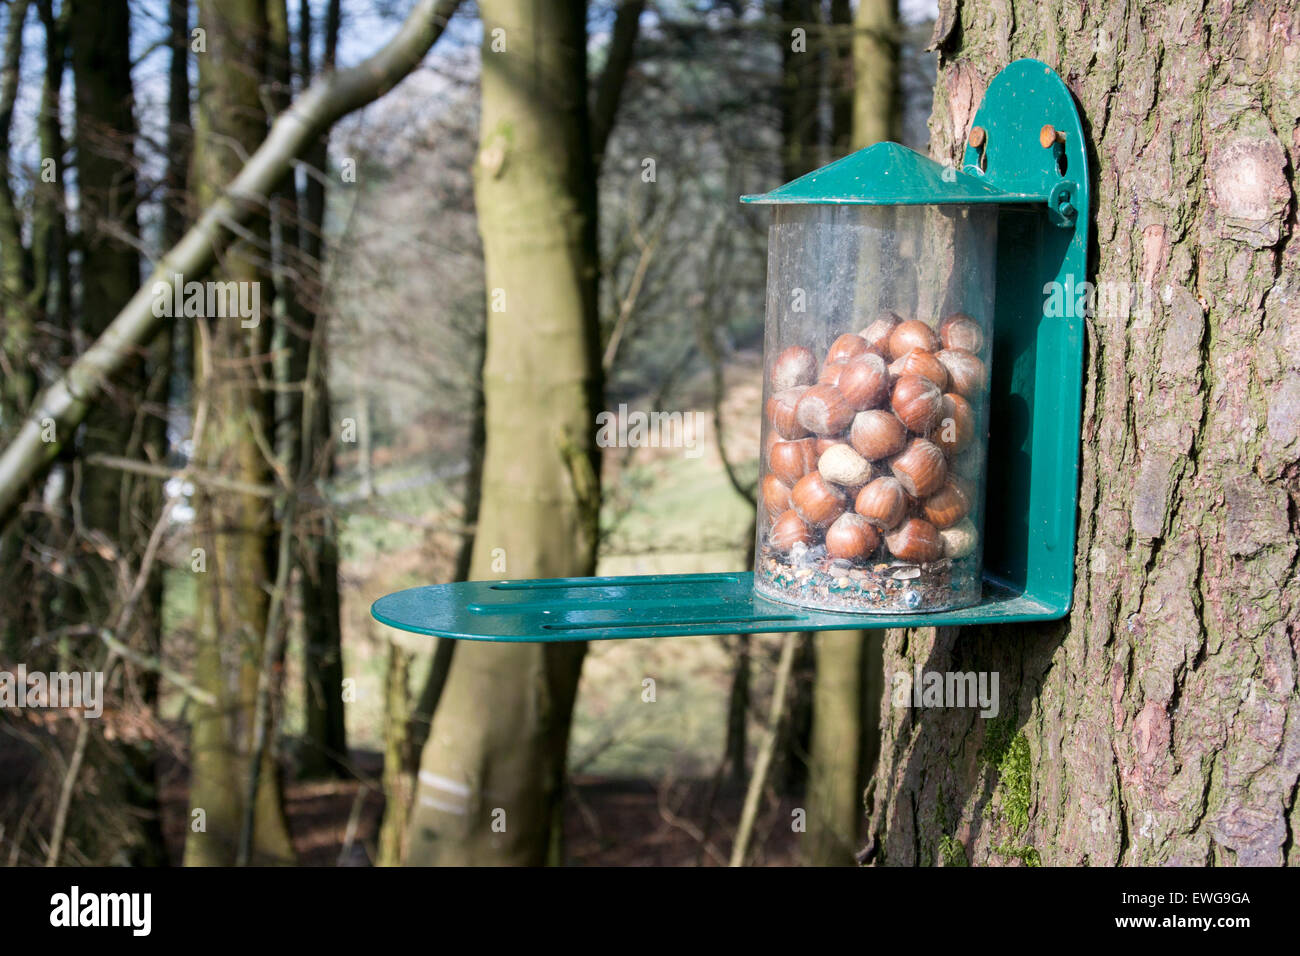 Feeder with Hazelnuts in woodland for Red Squirrels. Cumbria, UK Stock Photo